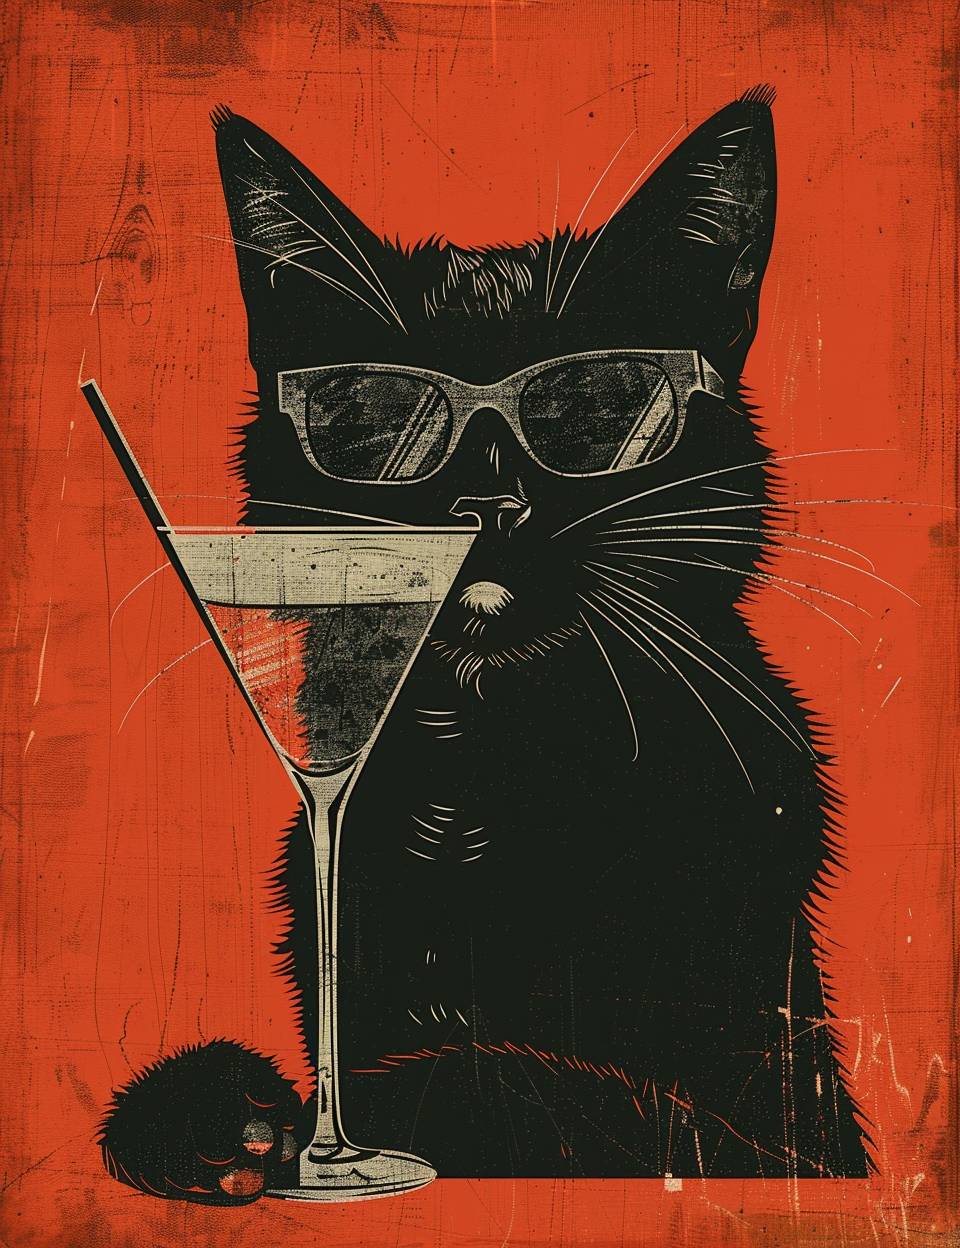 A black cat with sunglasses drinking from a martini glass, in the style of minimalist graphic designer, 1970–present, mallgoth, twisted characters, atomic mid century background, post-internet art